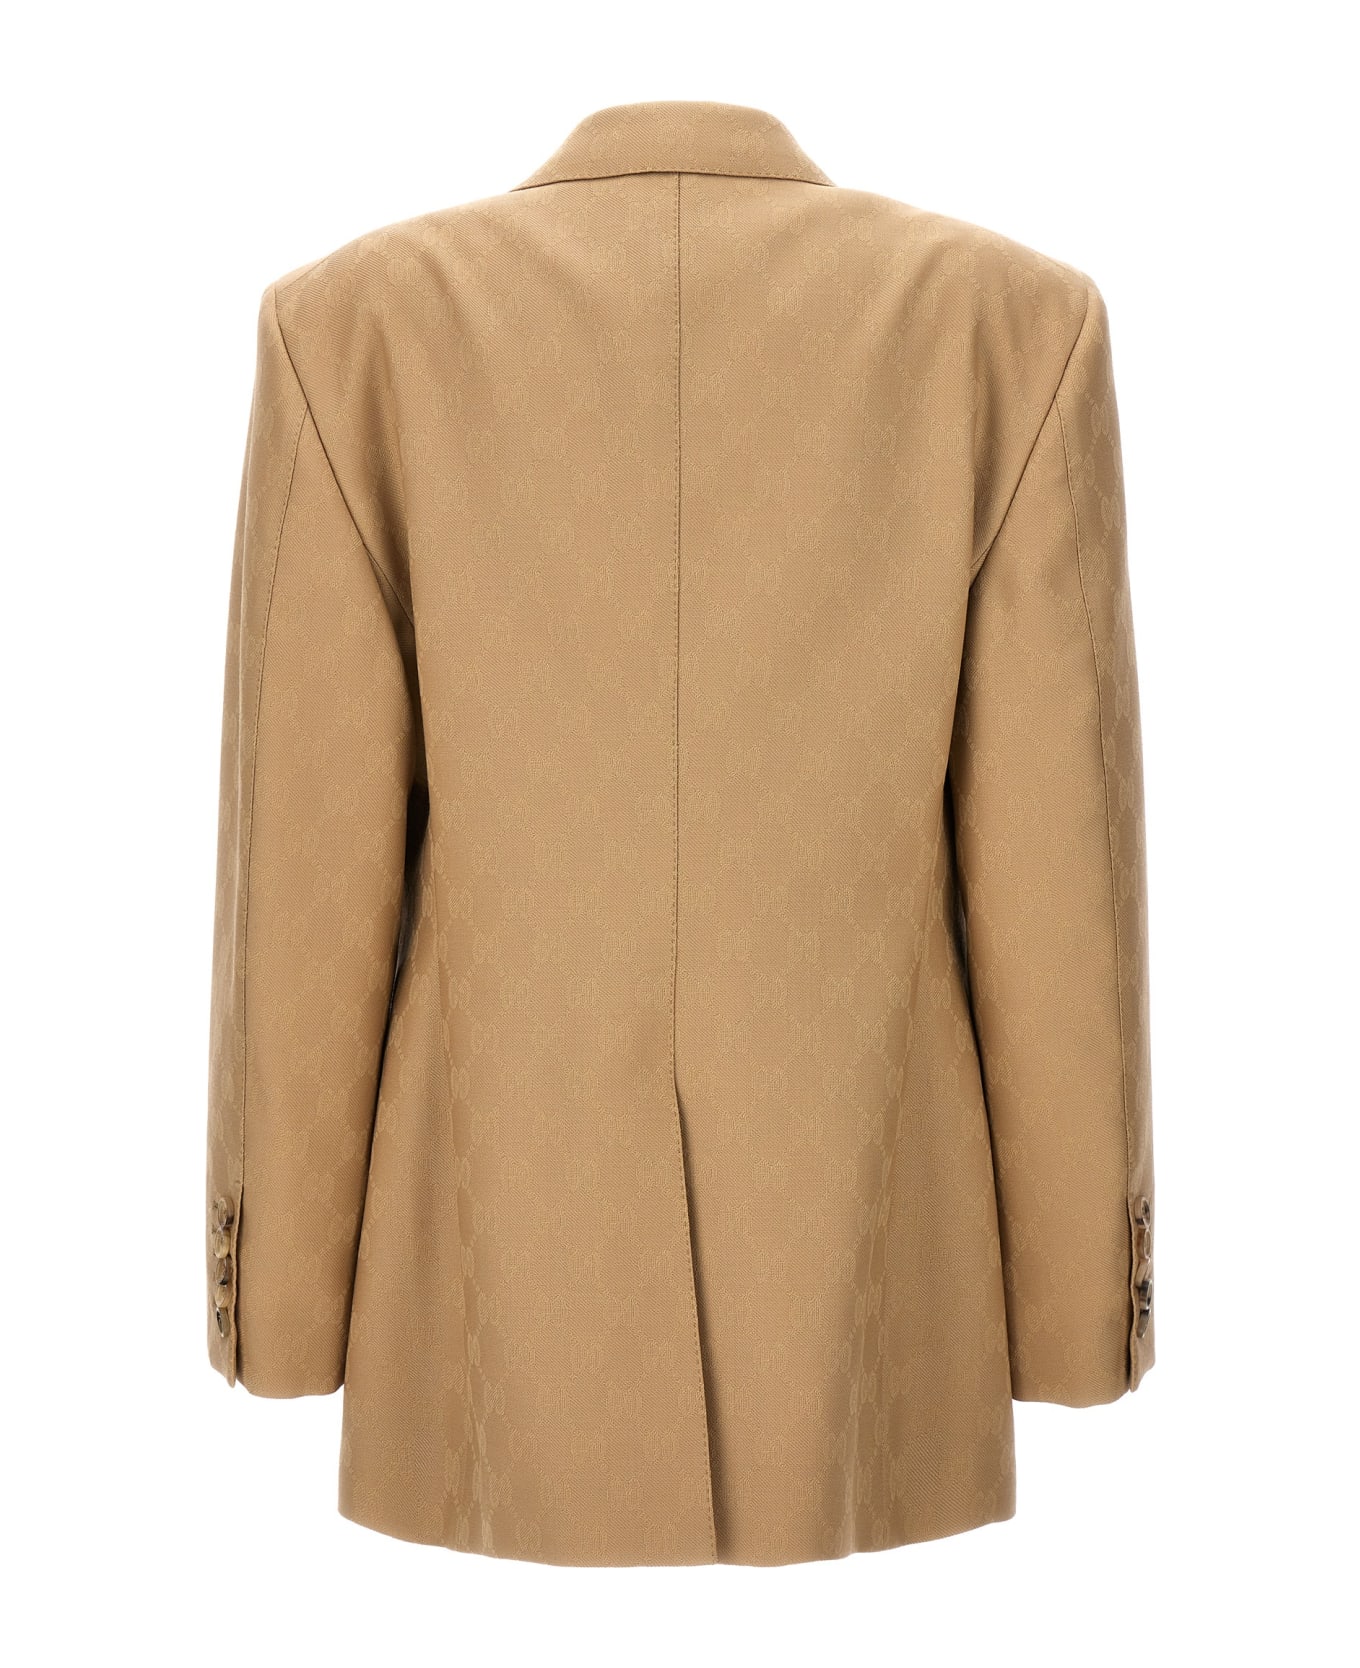 Gucci 'gg' Double-breasted Blazer - Beige コート